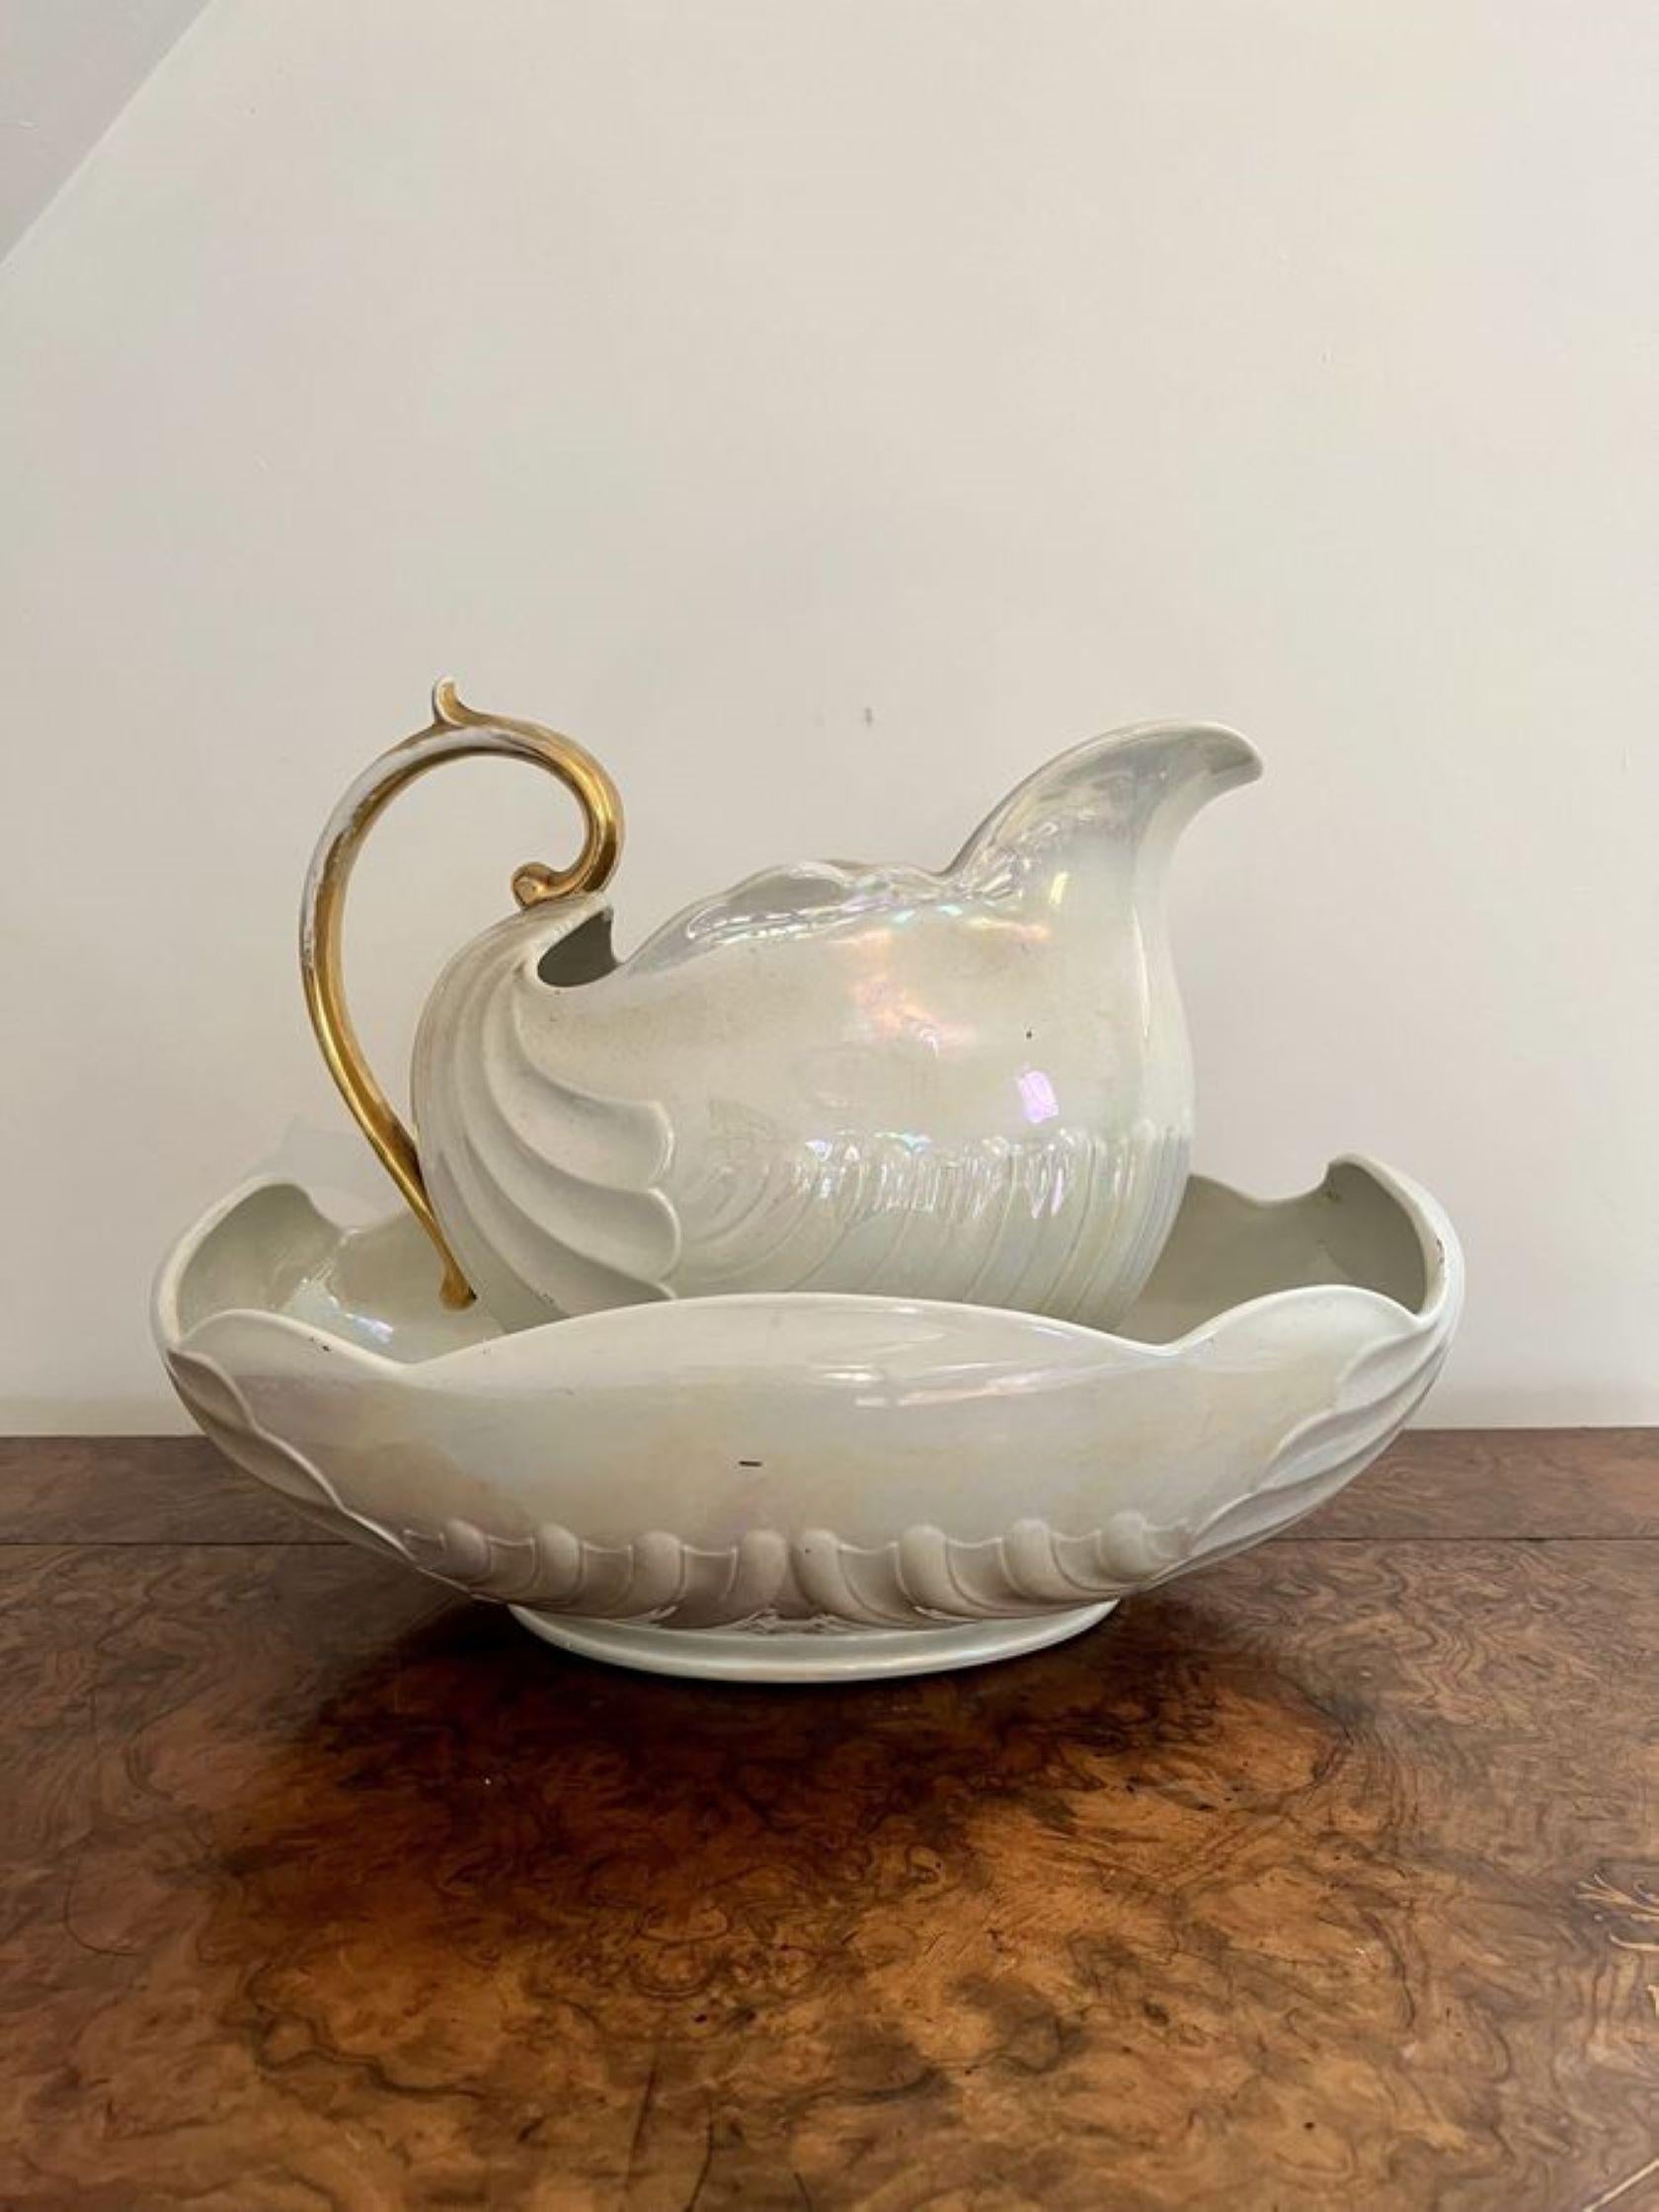 Lovely antique Edwardian Shelley jug and bowl set having a wonderful pearl shimmer ground with a gold shaped handle to the back both in the form of a shell, 
Stamped to base
Rd 330395 

D. 1900